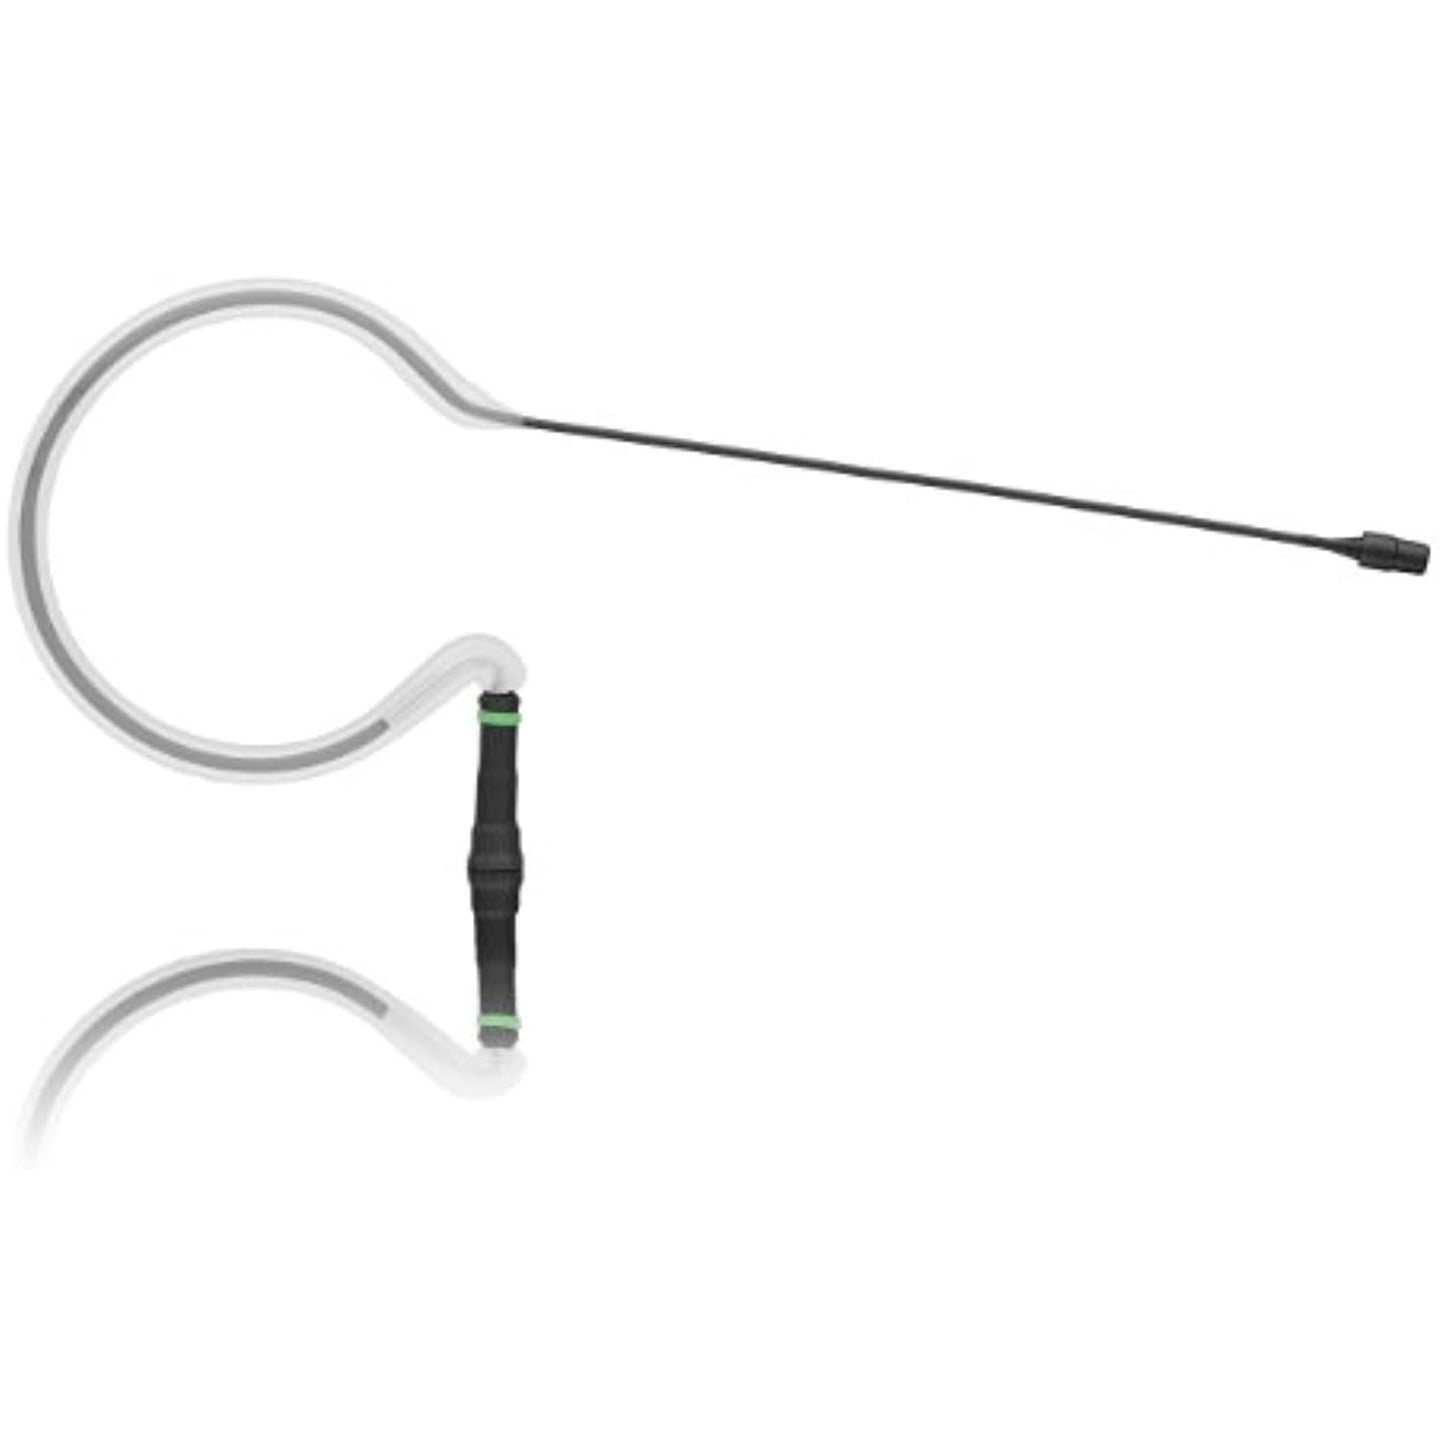 Countryman E6IDW6B2S3 Soft E6i Directional Earset with 2 mm Cable for Sennheiser/Shure Transmitters (Black)